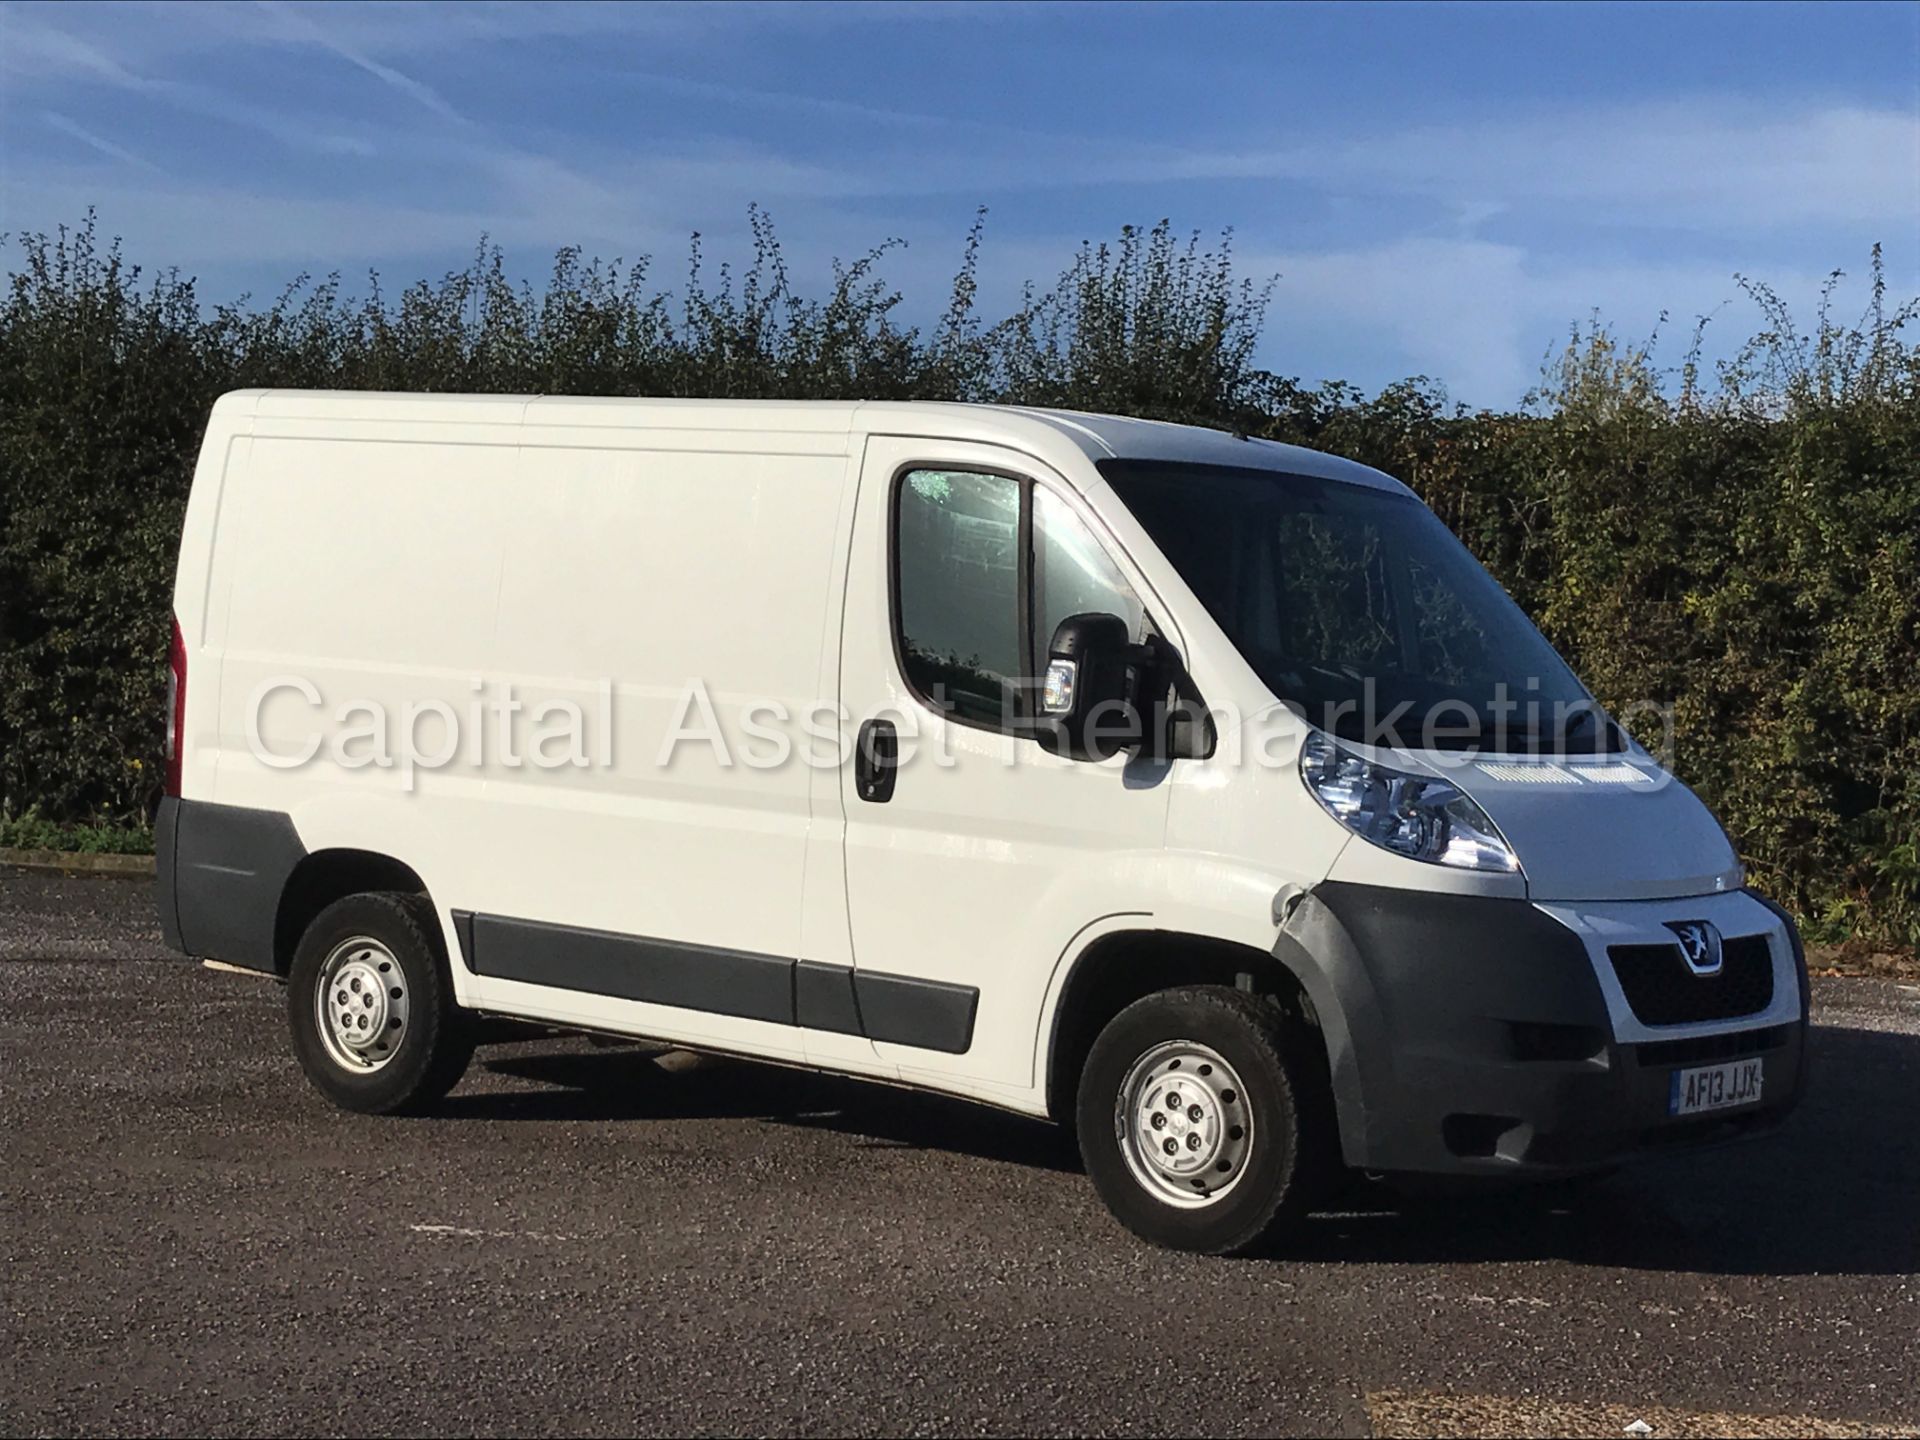 PEUGEOT BOXER 330 L1H1 (2013 - 13 REG) 'SWB - 2.2 HDI - 6 SPEED' (1 OWNER FROM NEW) **LOW MILES**